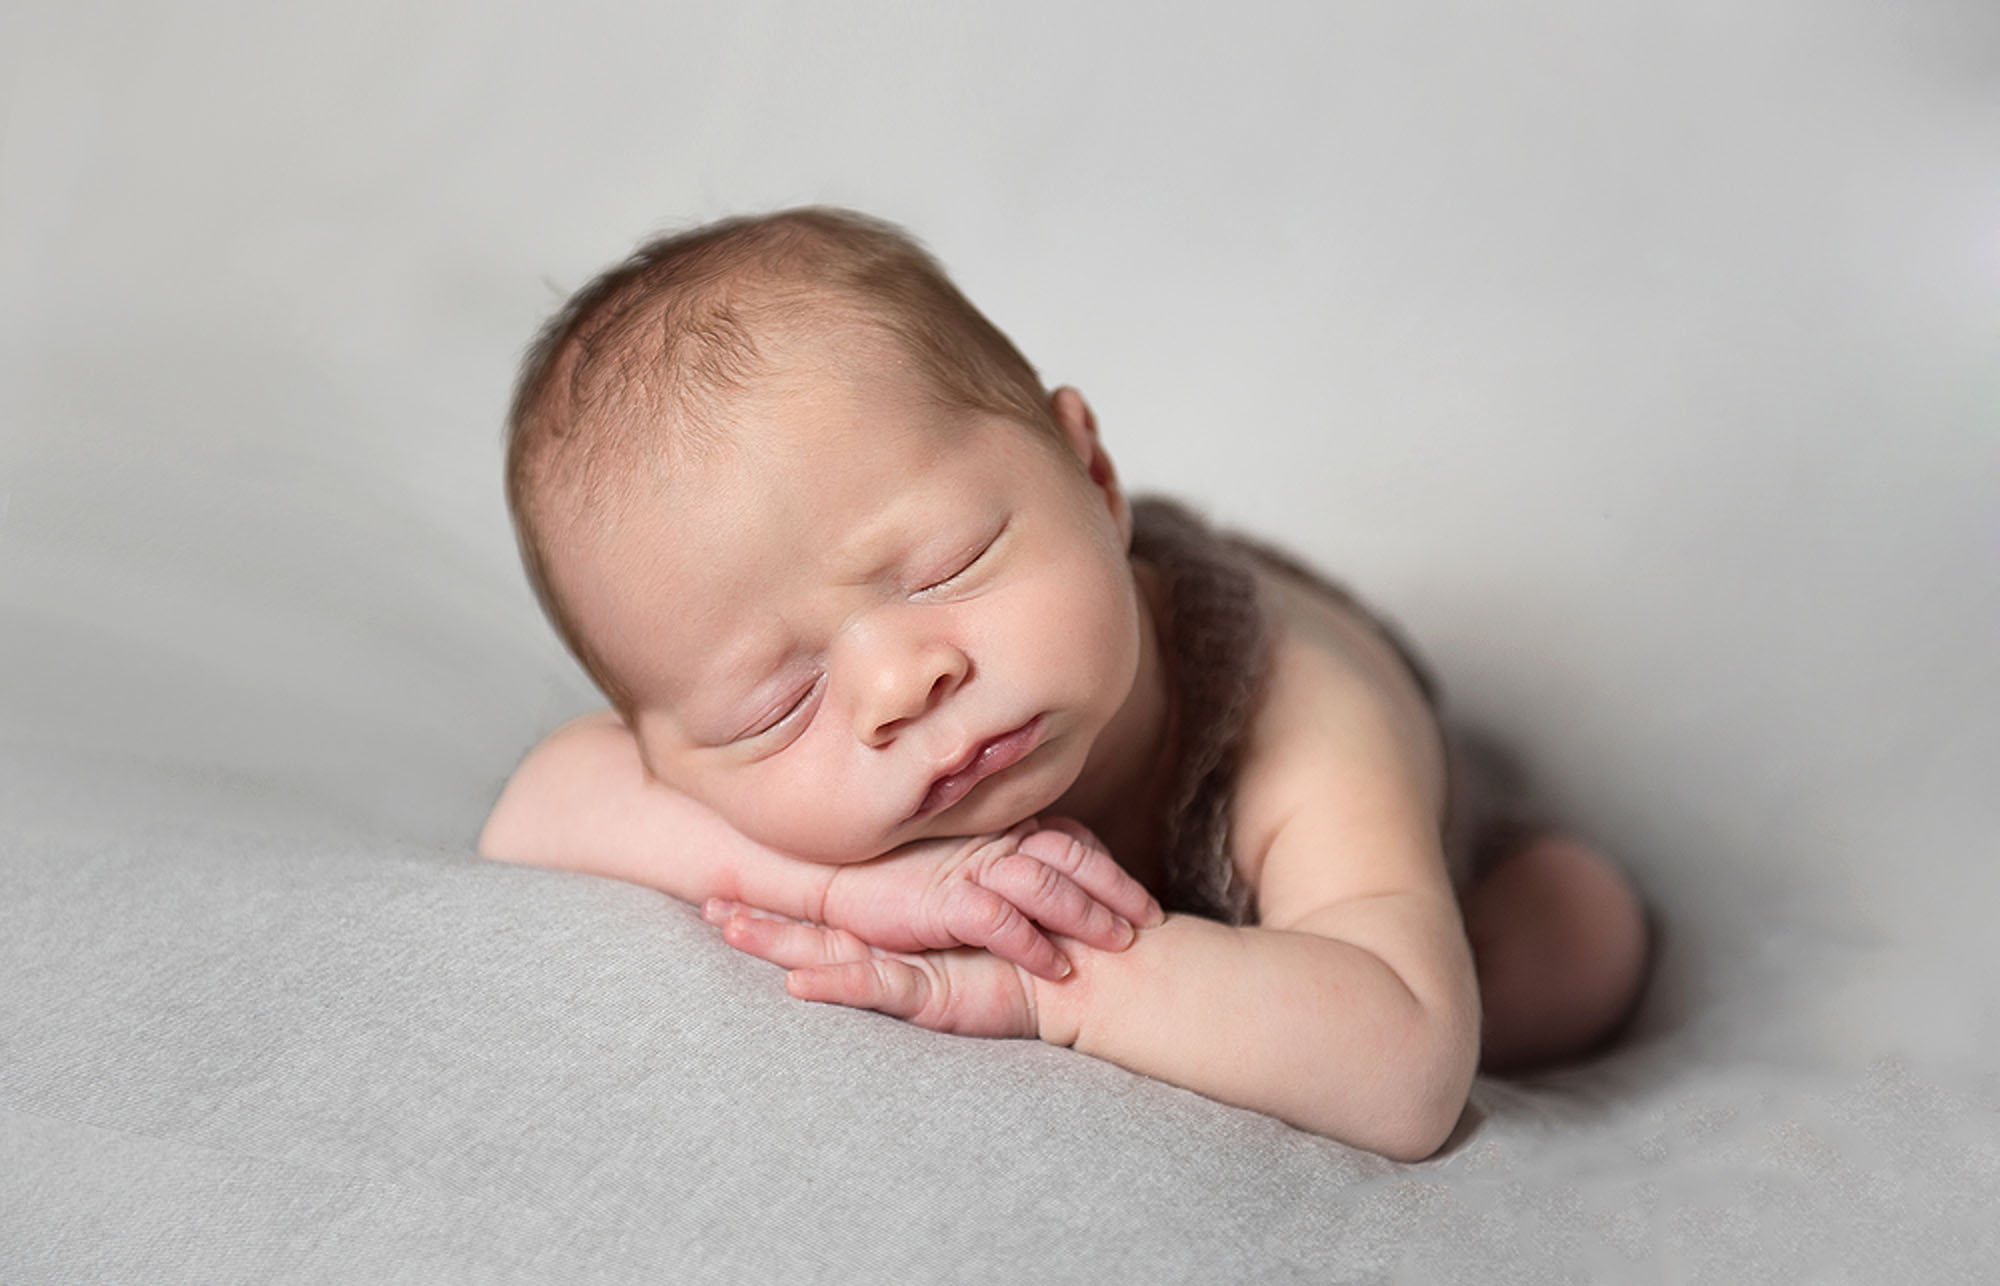 Baby looking sleepy at Newborn photography session in norfolk